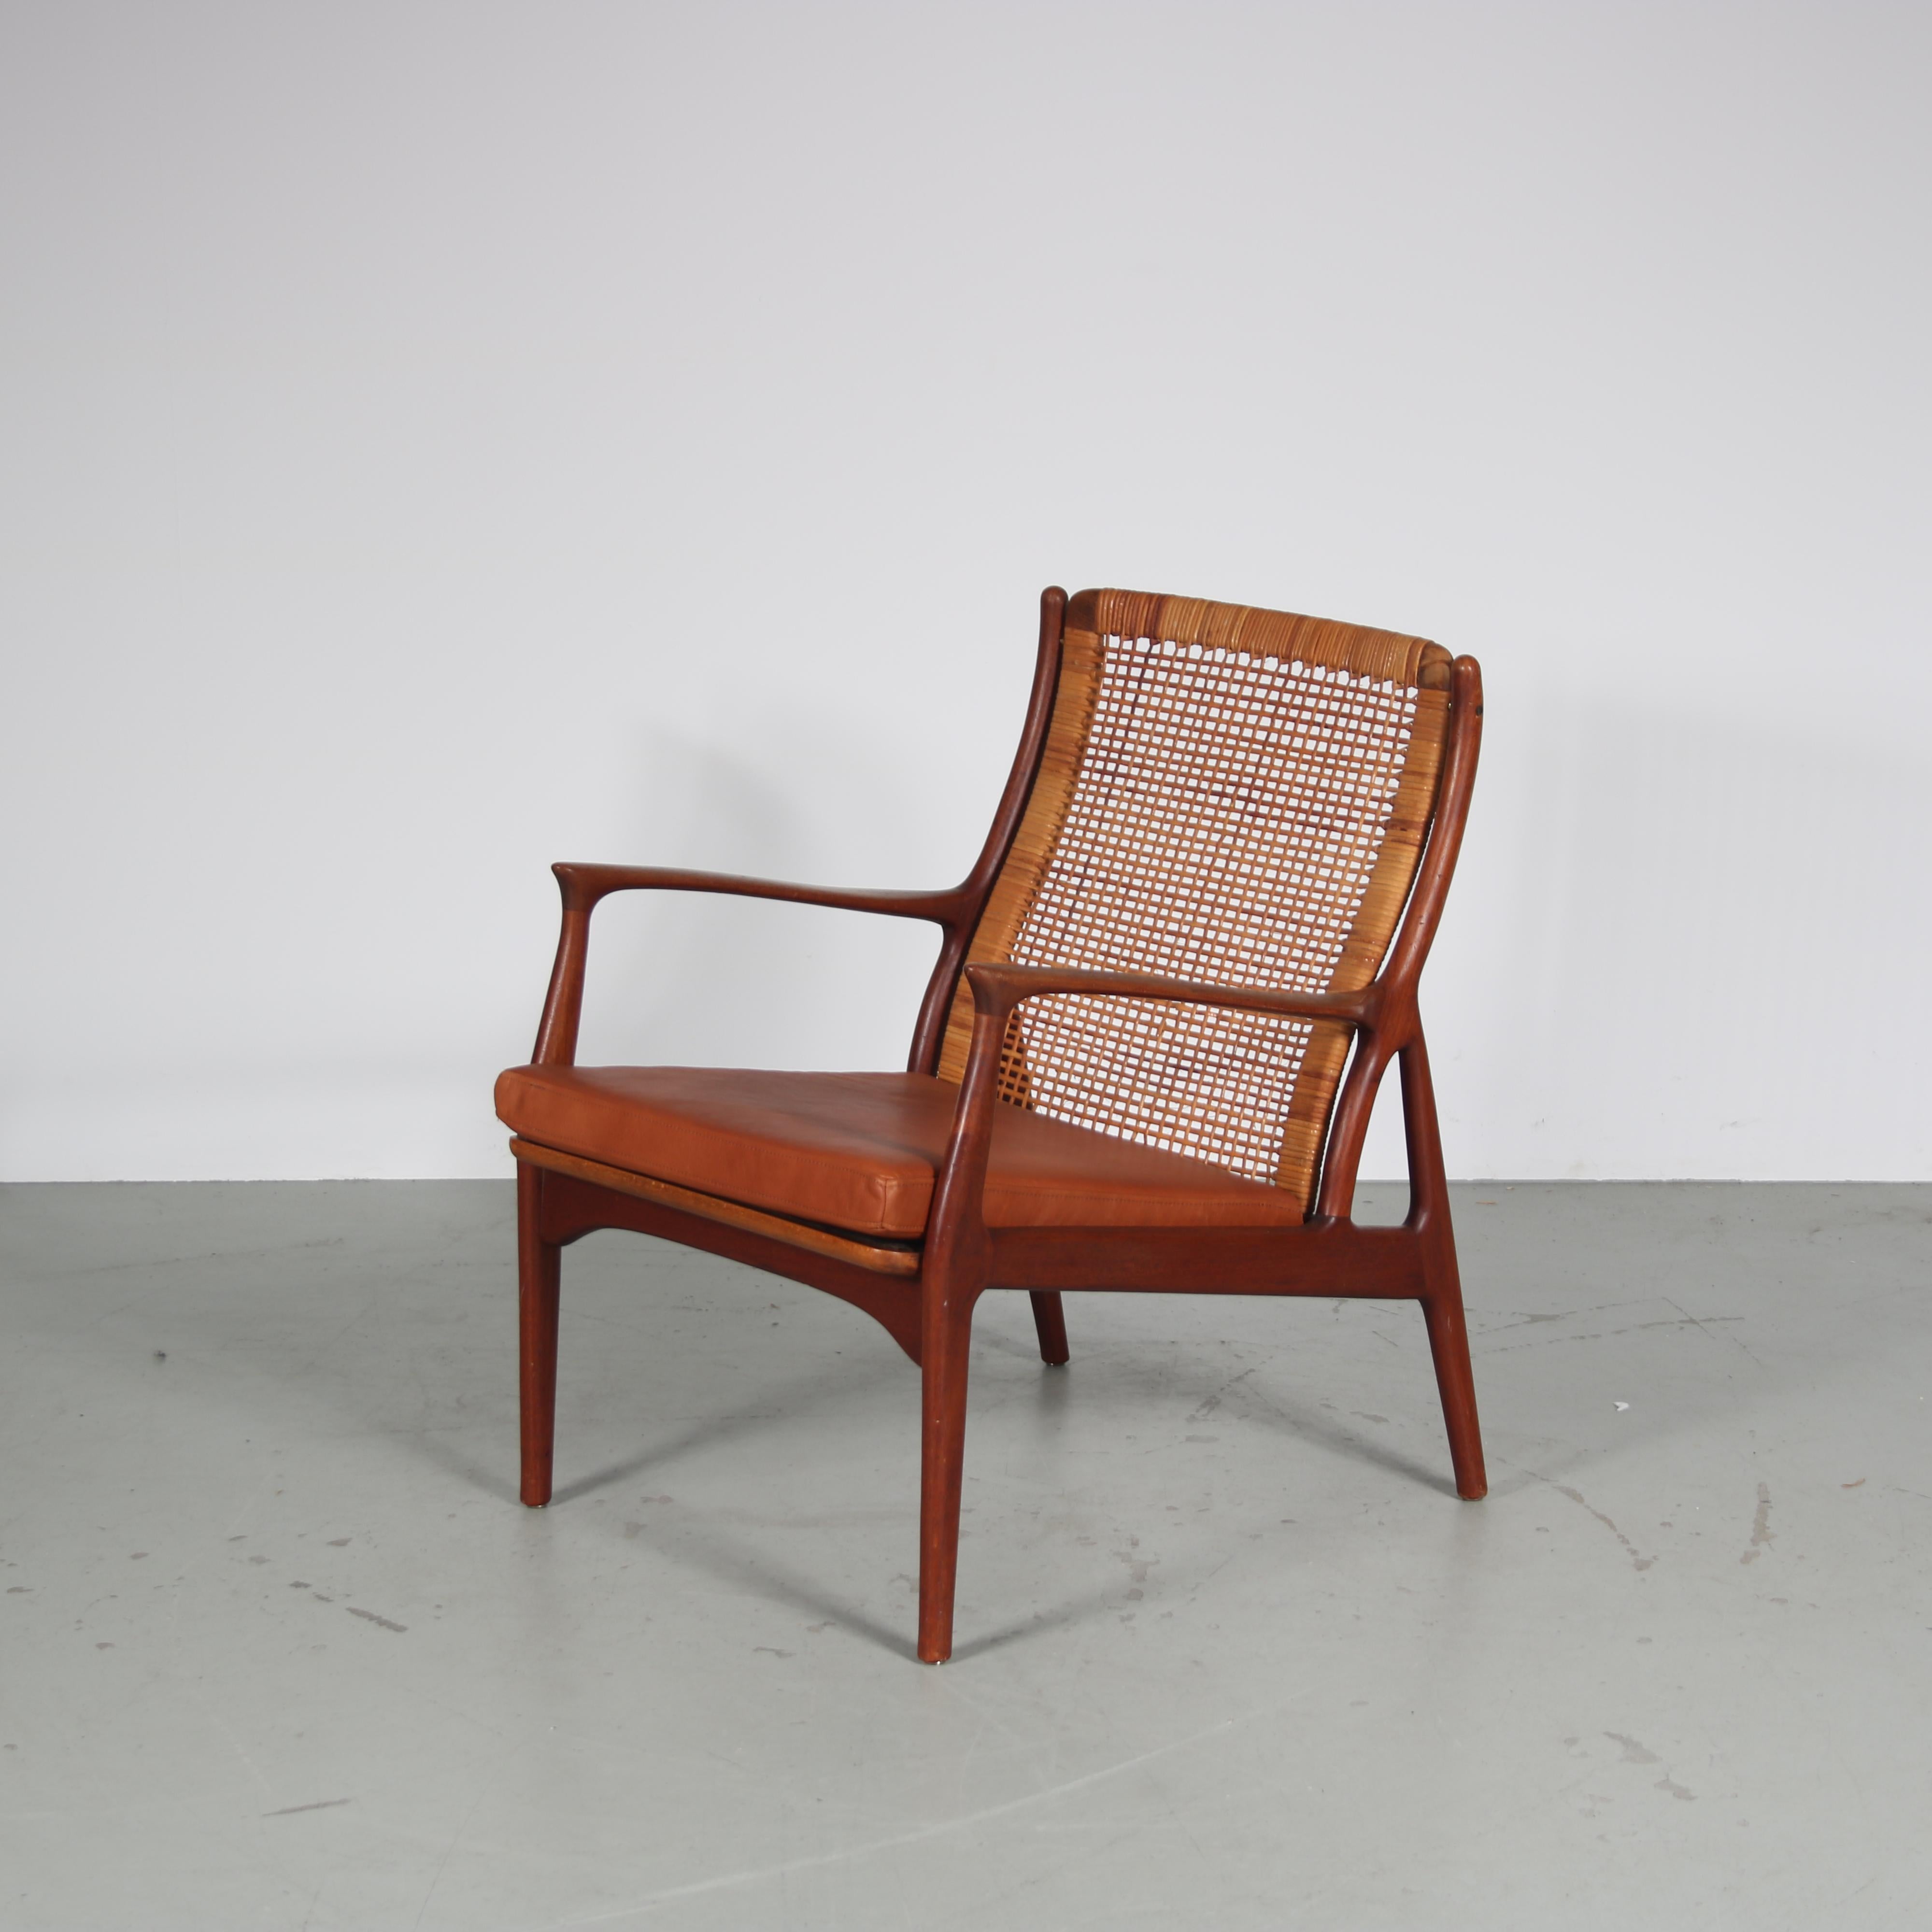 A beautiful lounge chair designed by Danish designer Erik Andsersen, manufactured by Palle Pedersen in Denmark around 1950.

This wonderful piece has a very nice, organic shape that adds a sense of luxury to the design as well as an impressive